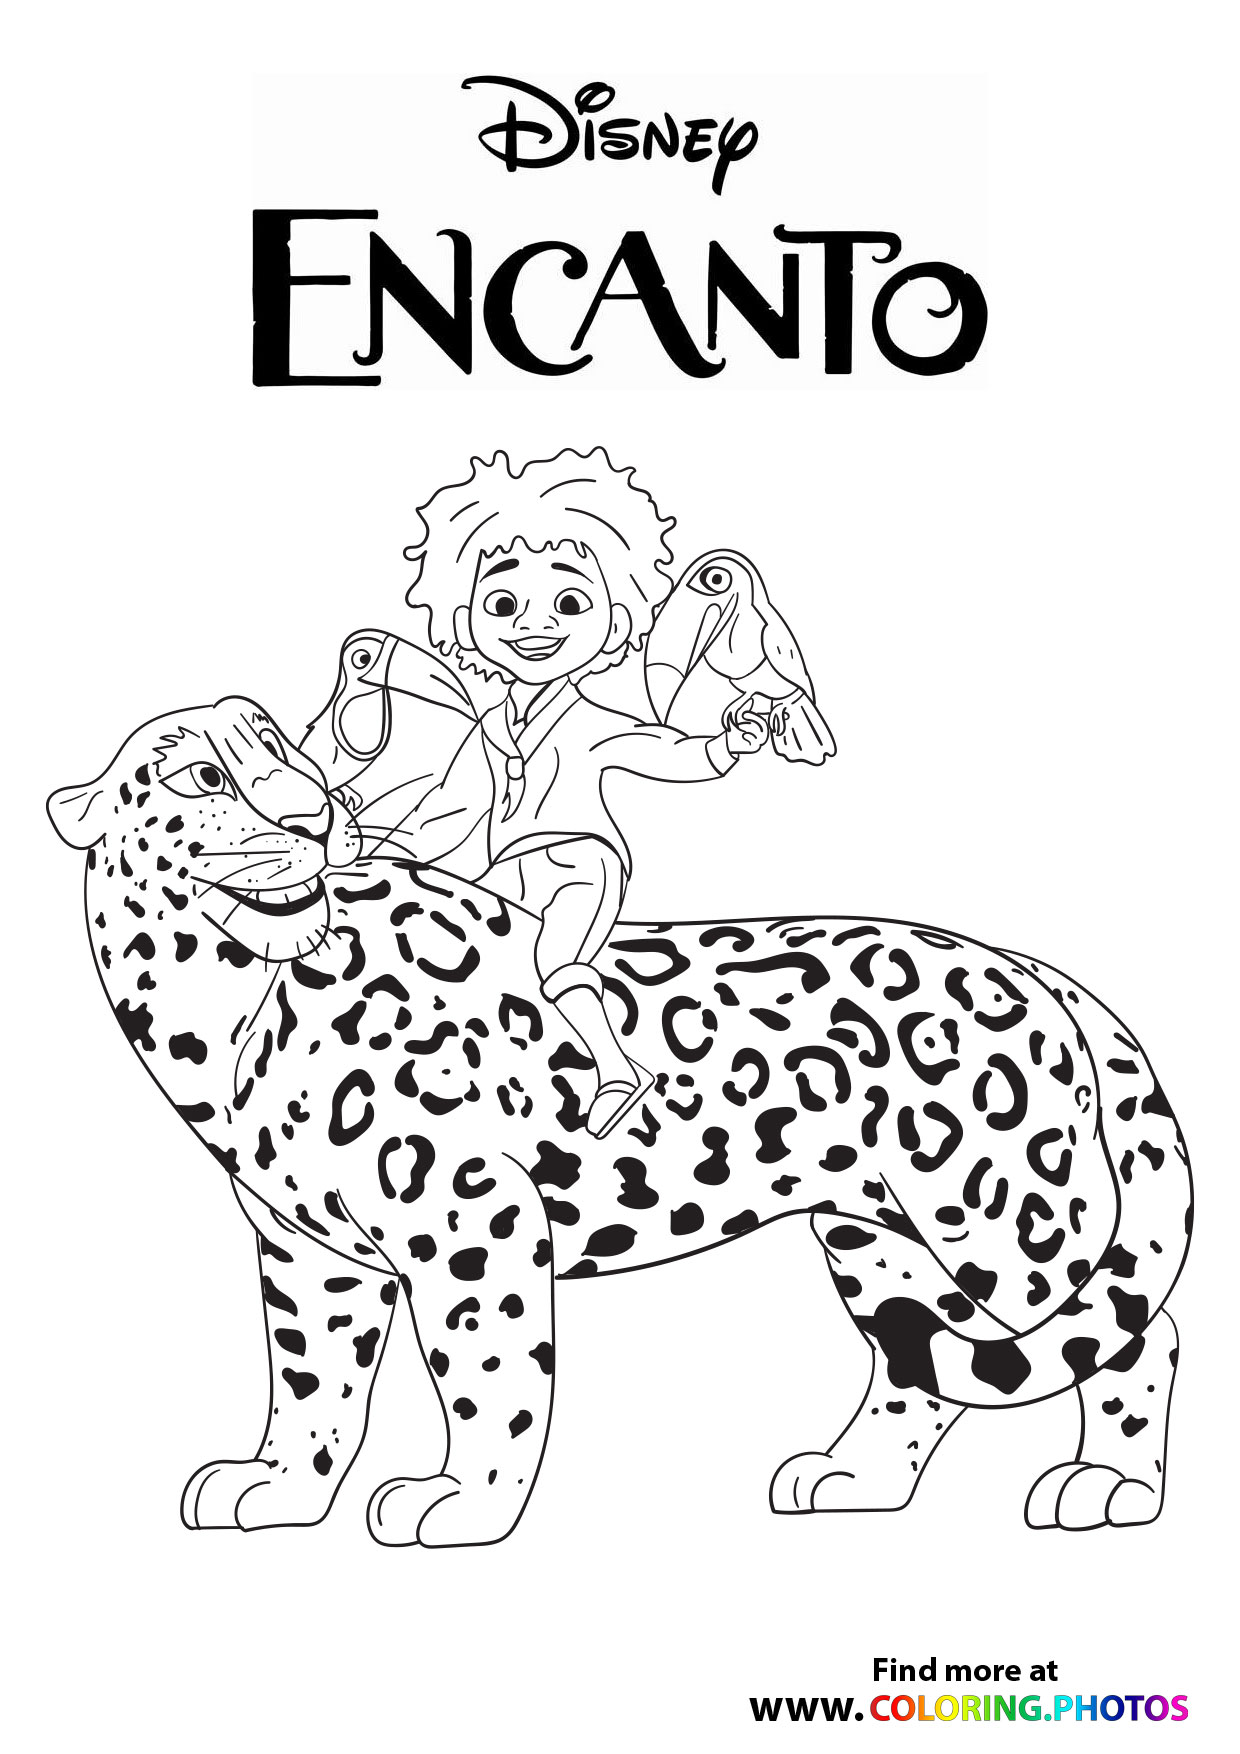 Disney Encanto Coloring Pages for kids   Free coloring pages for ...